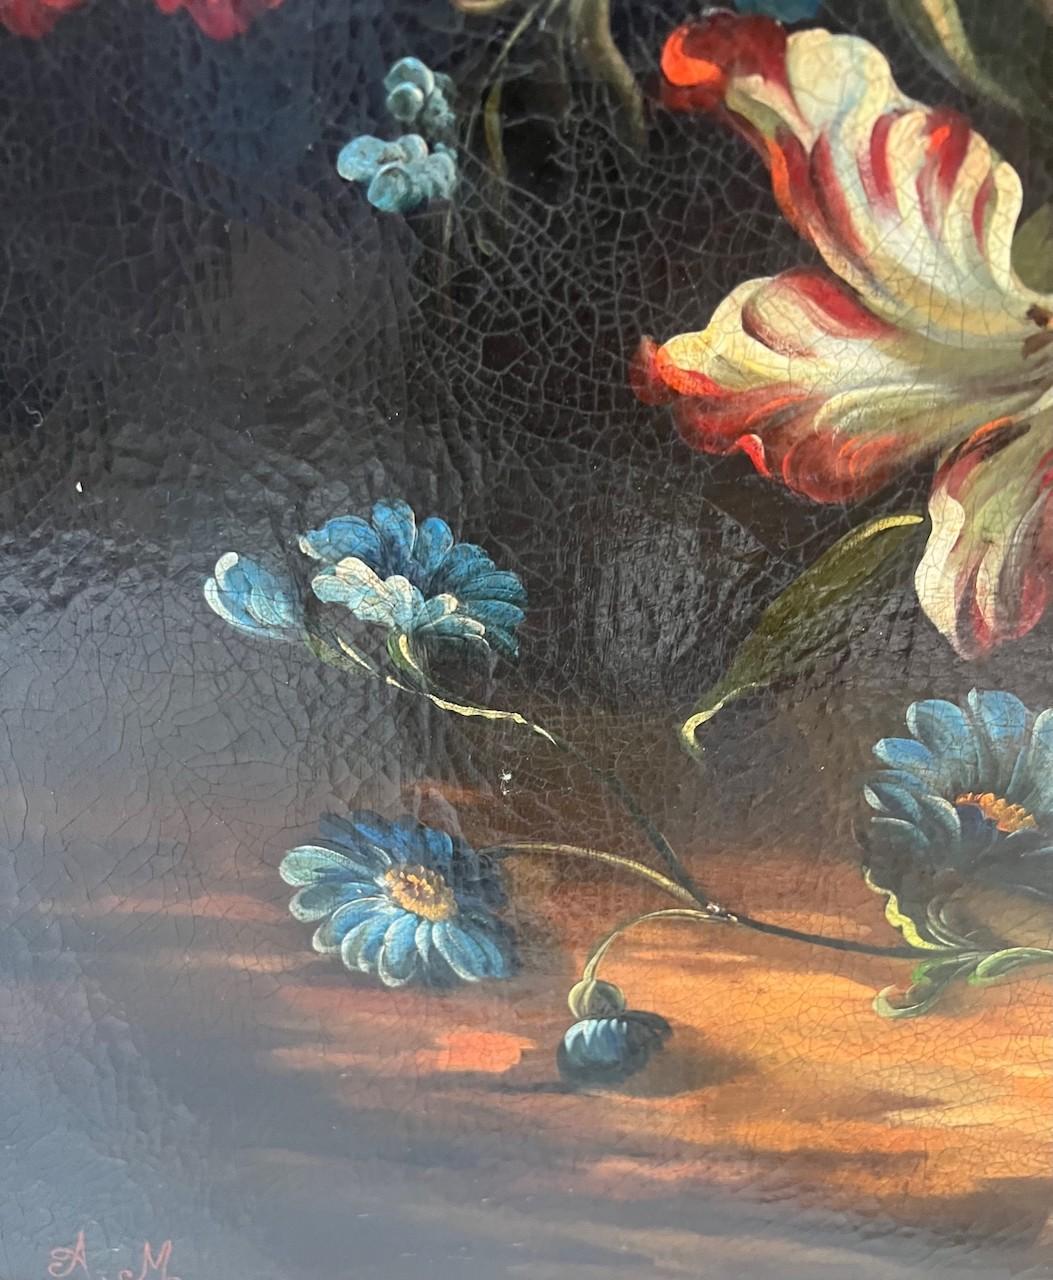 Large Pair of Early 19th Century Still life of Flowers In Good Condition For Sale In Petworth,West Sussex, GB